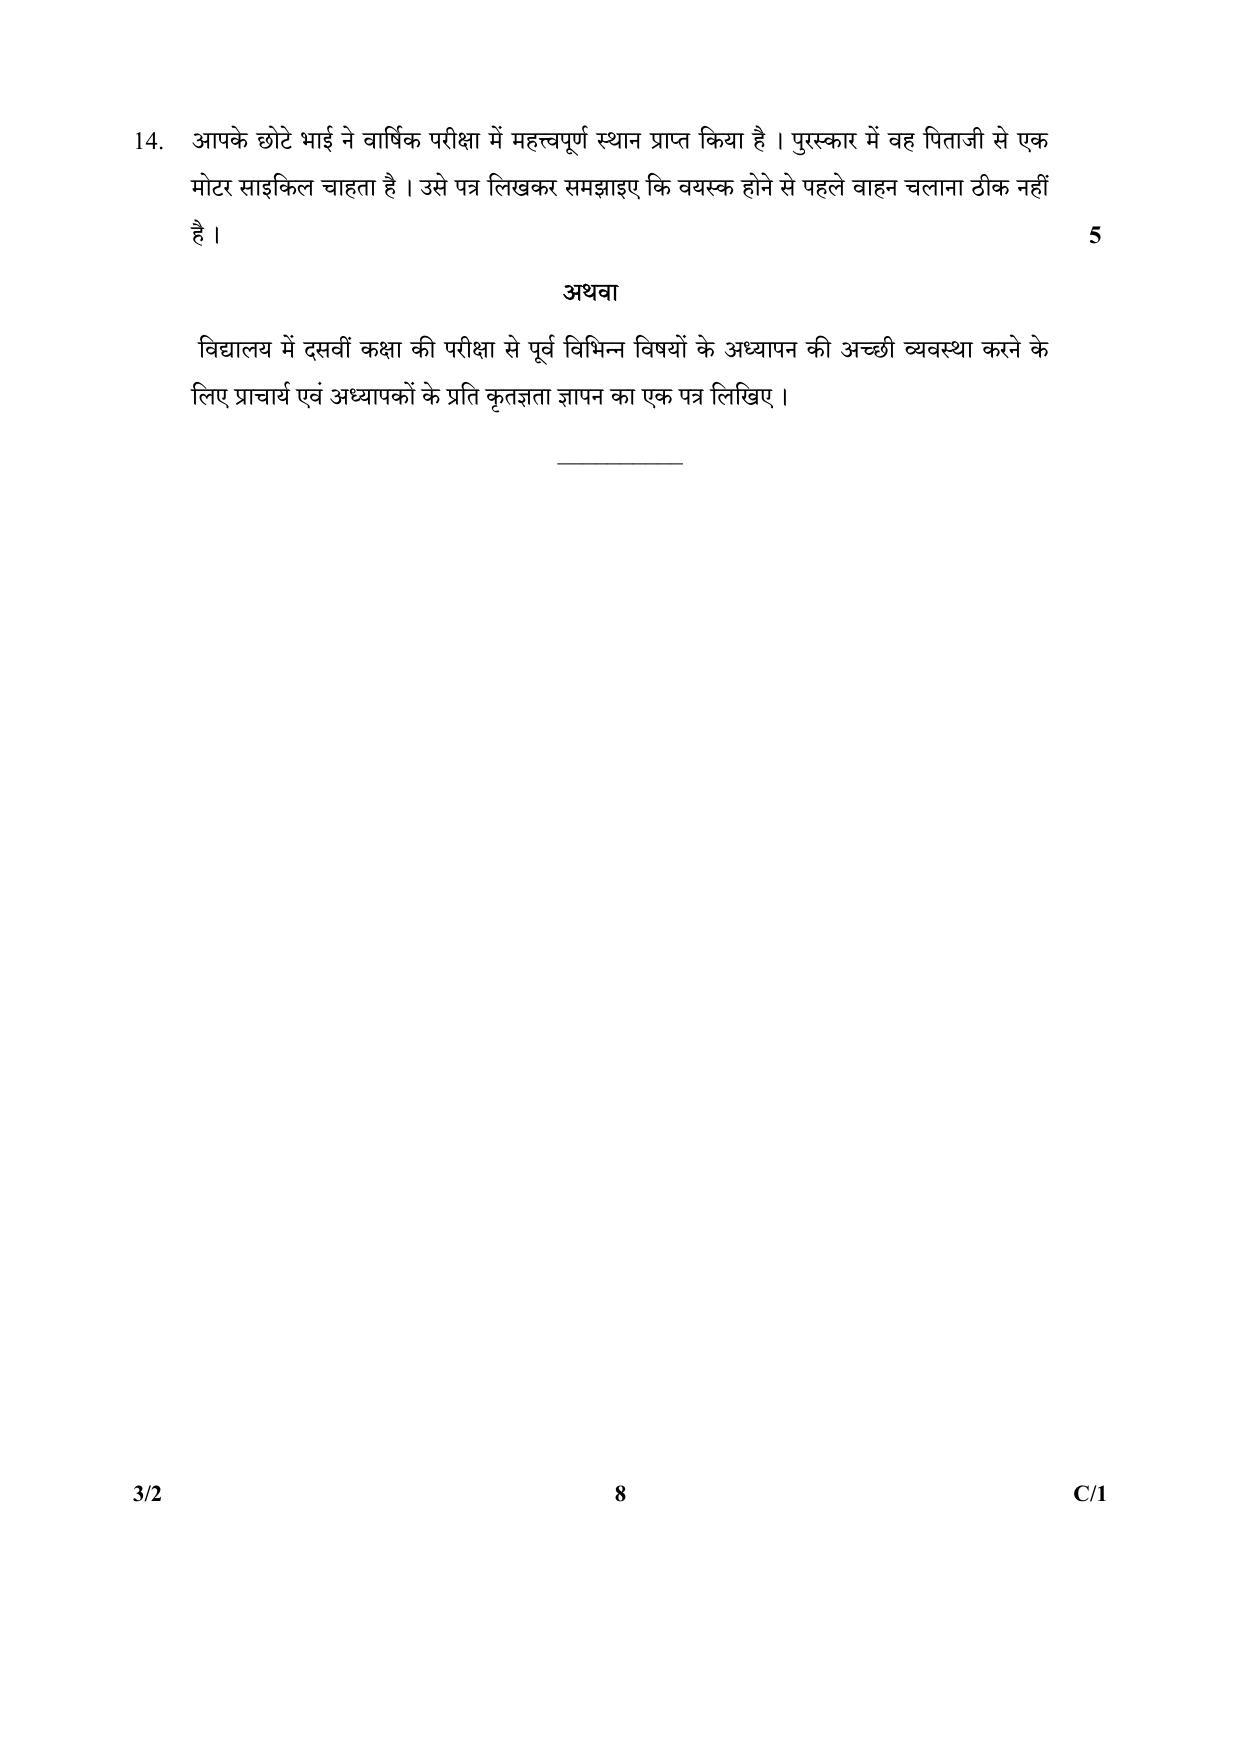 CBSE Class 10 3-2_Hindi 2018 Compartment Question Paper - Page 8